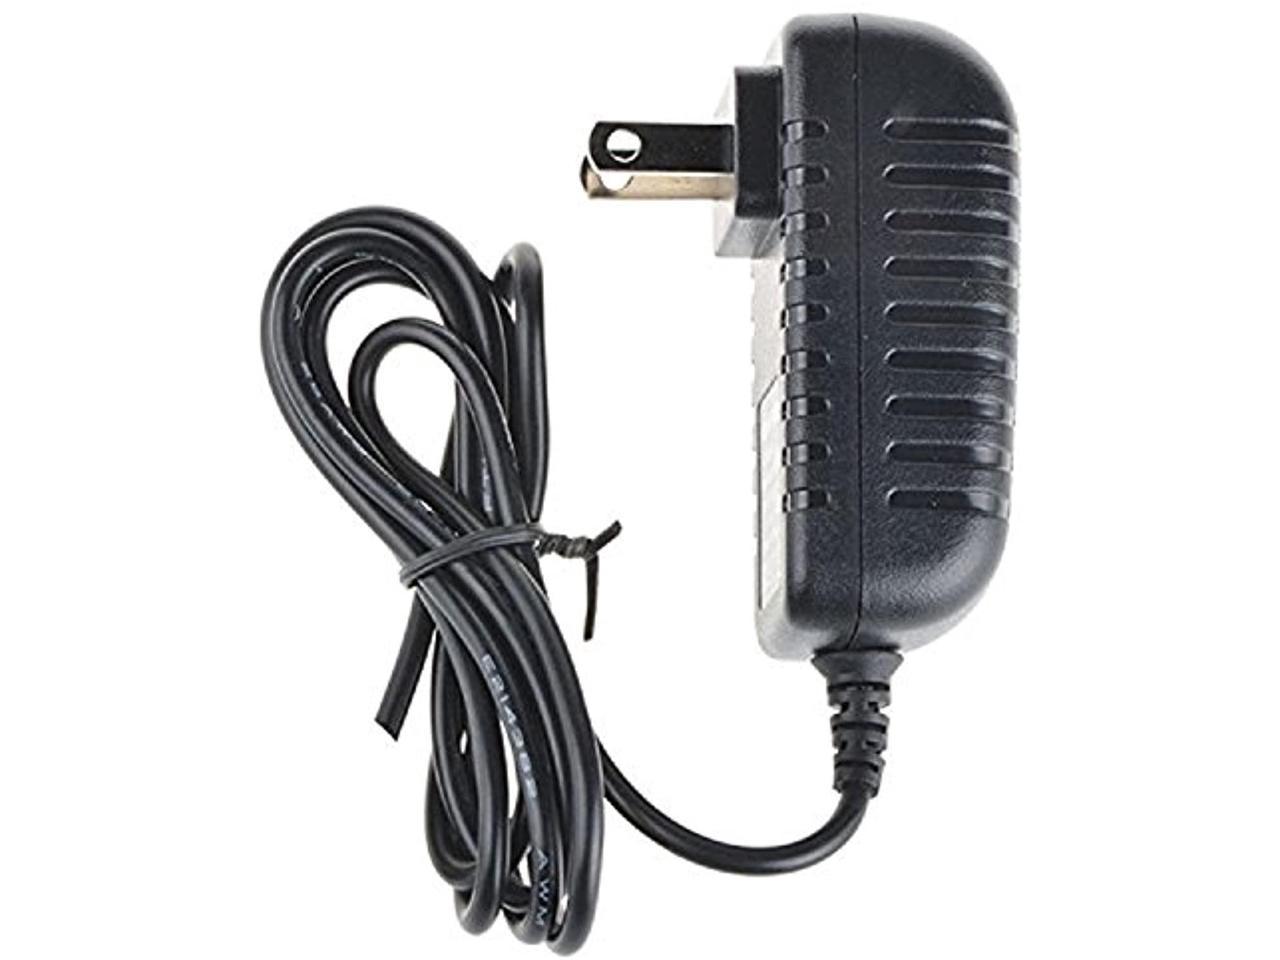 13.5V AC Adapter For Generac GP7000E generator Power Supply Cord Battery Charger 